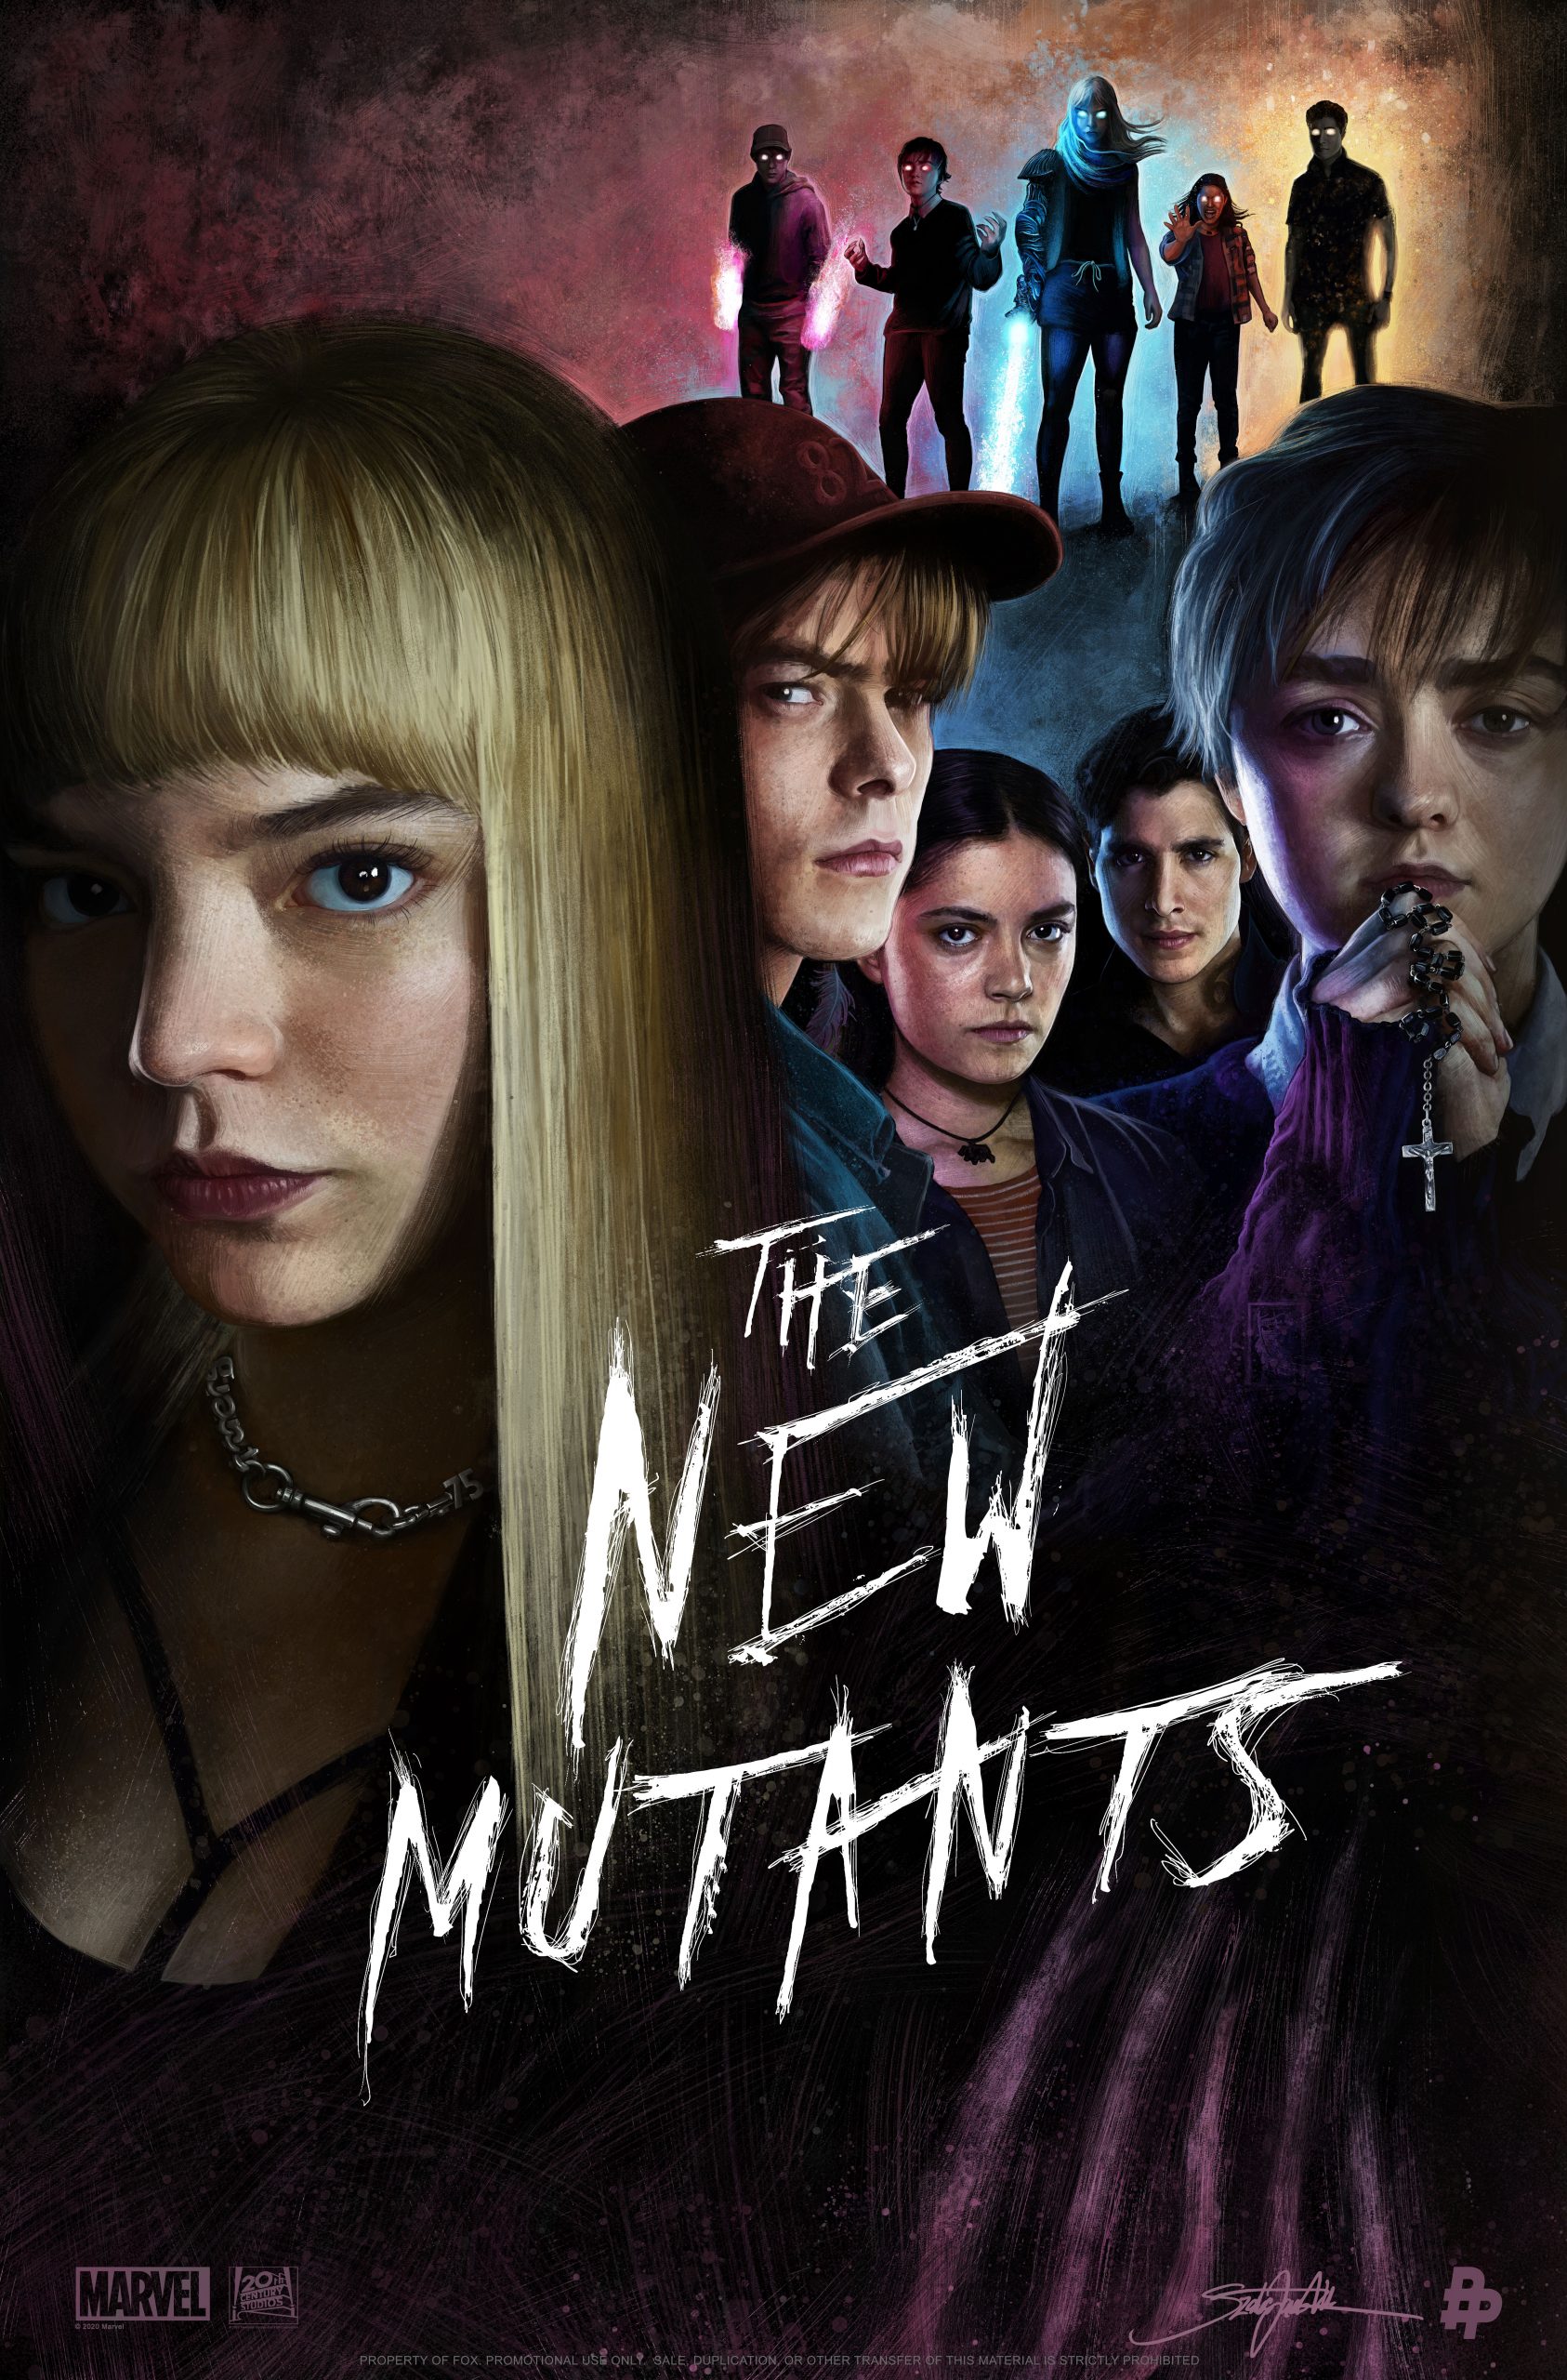 The New Mutants Was Delayed for So Long Even Reshoots Weren't Possible